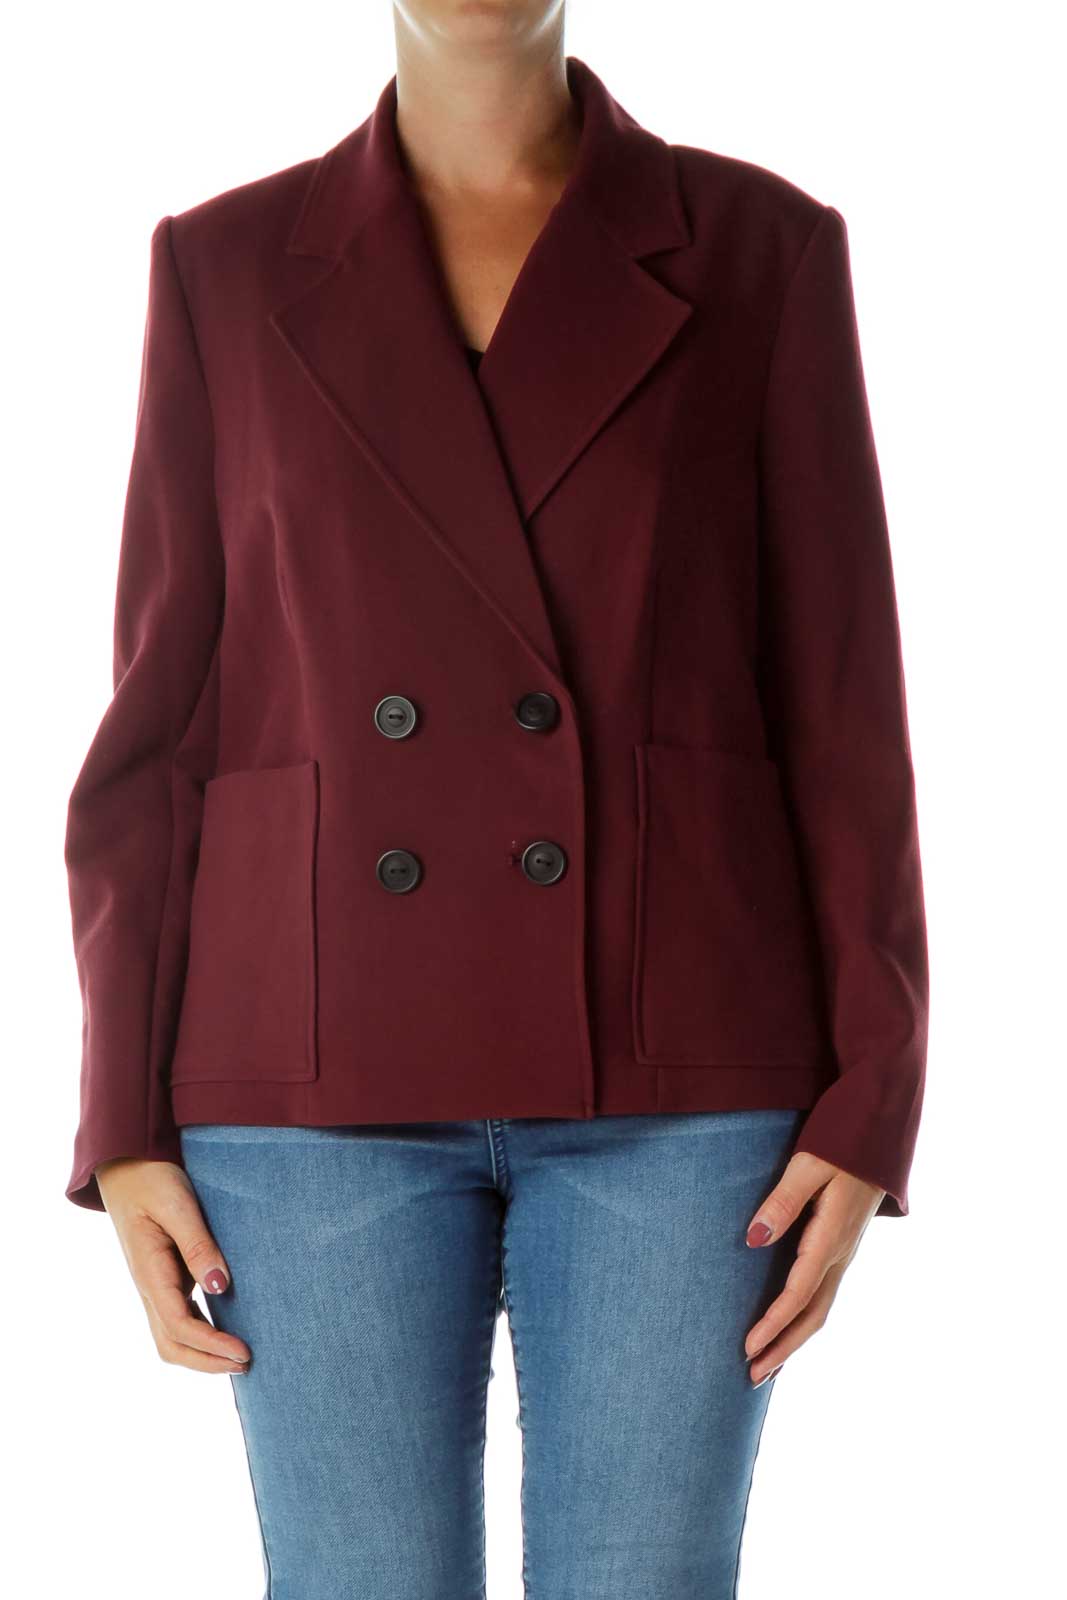 Burgundy Double-Breasted Blazer Front